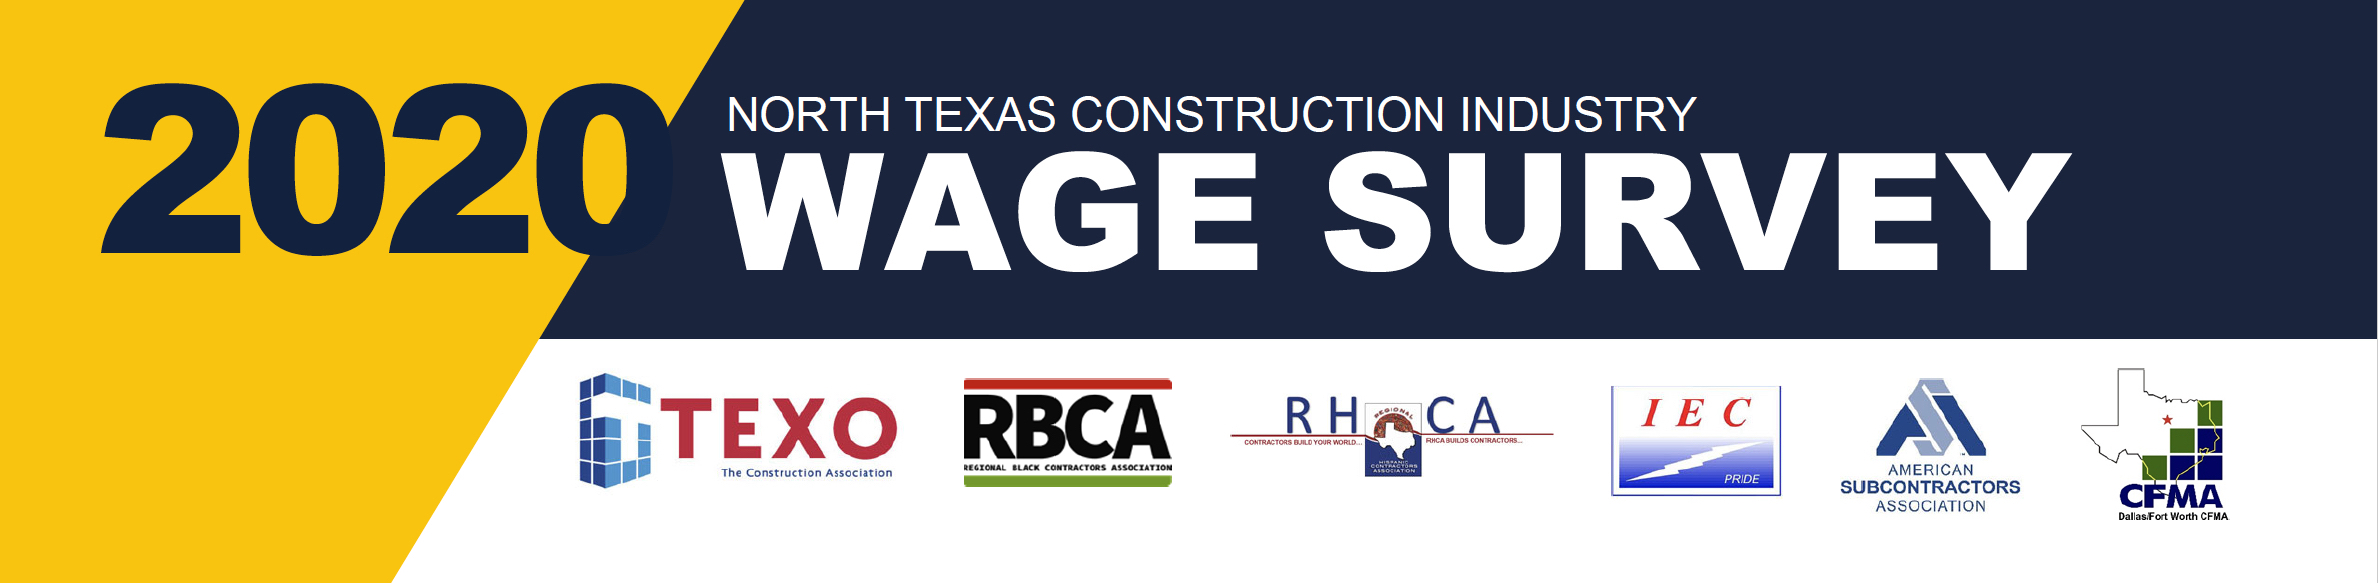 2020 North Texas Construction Industry Wage Survey